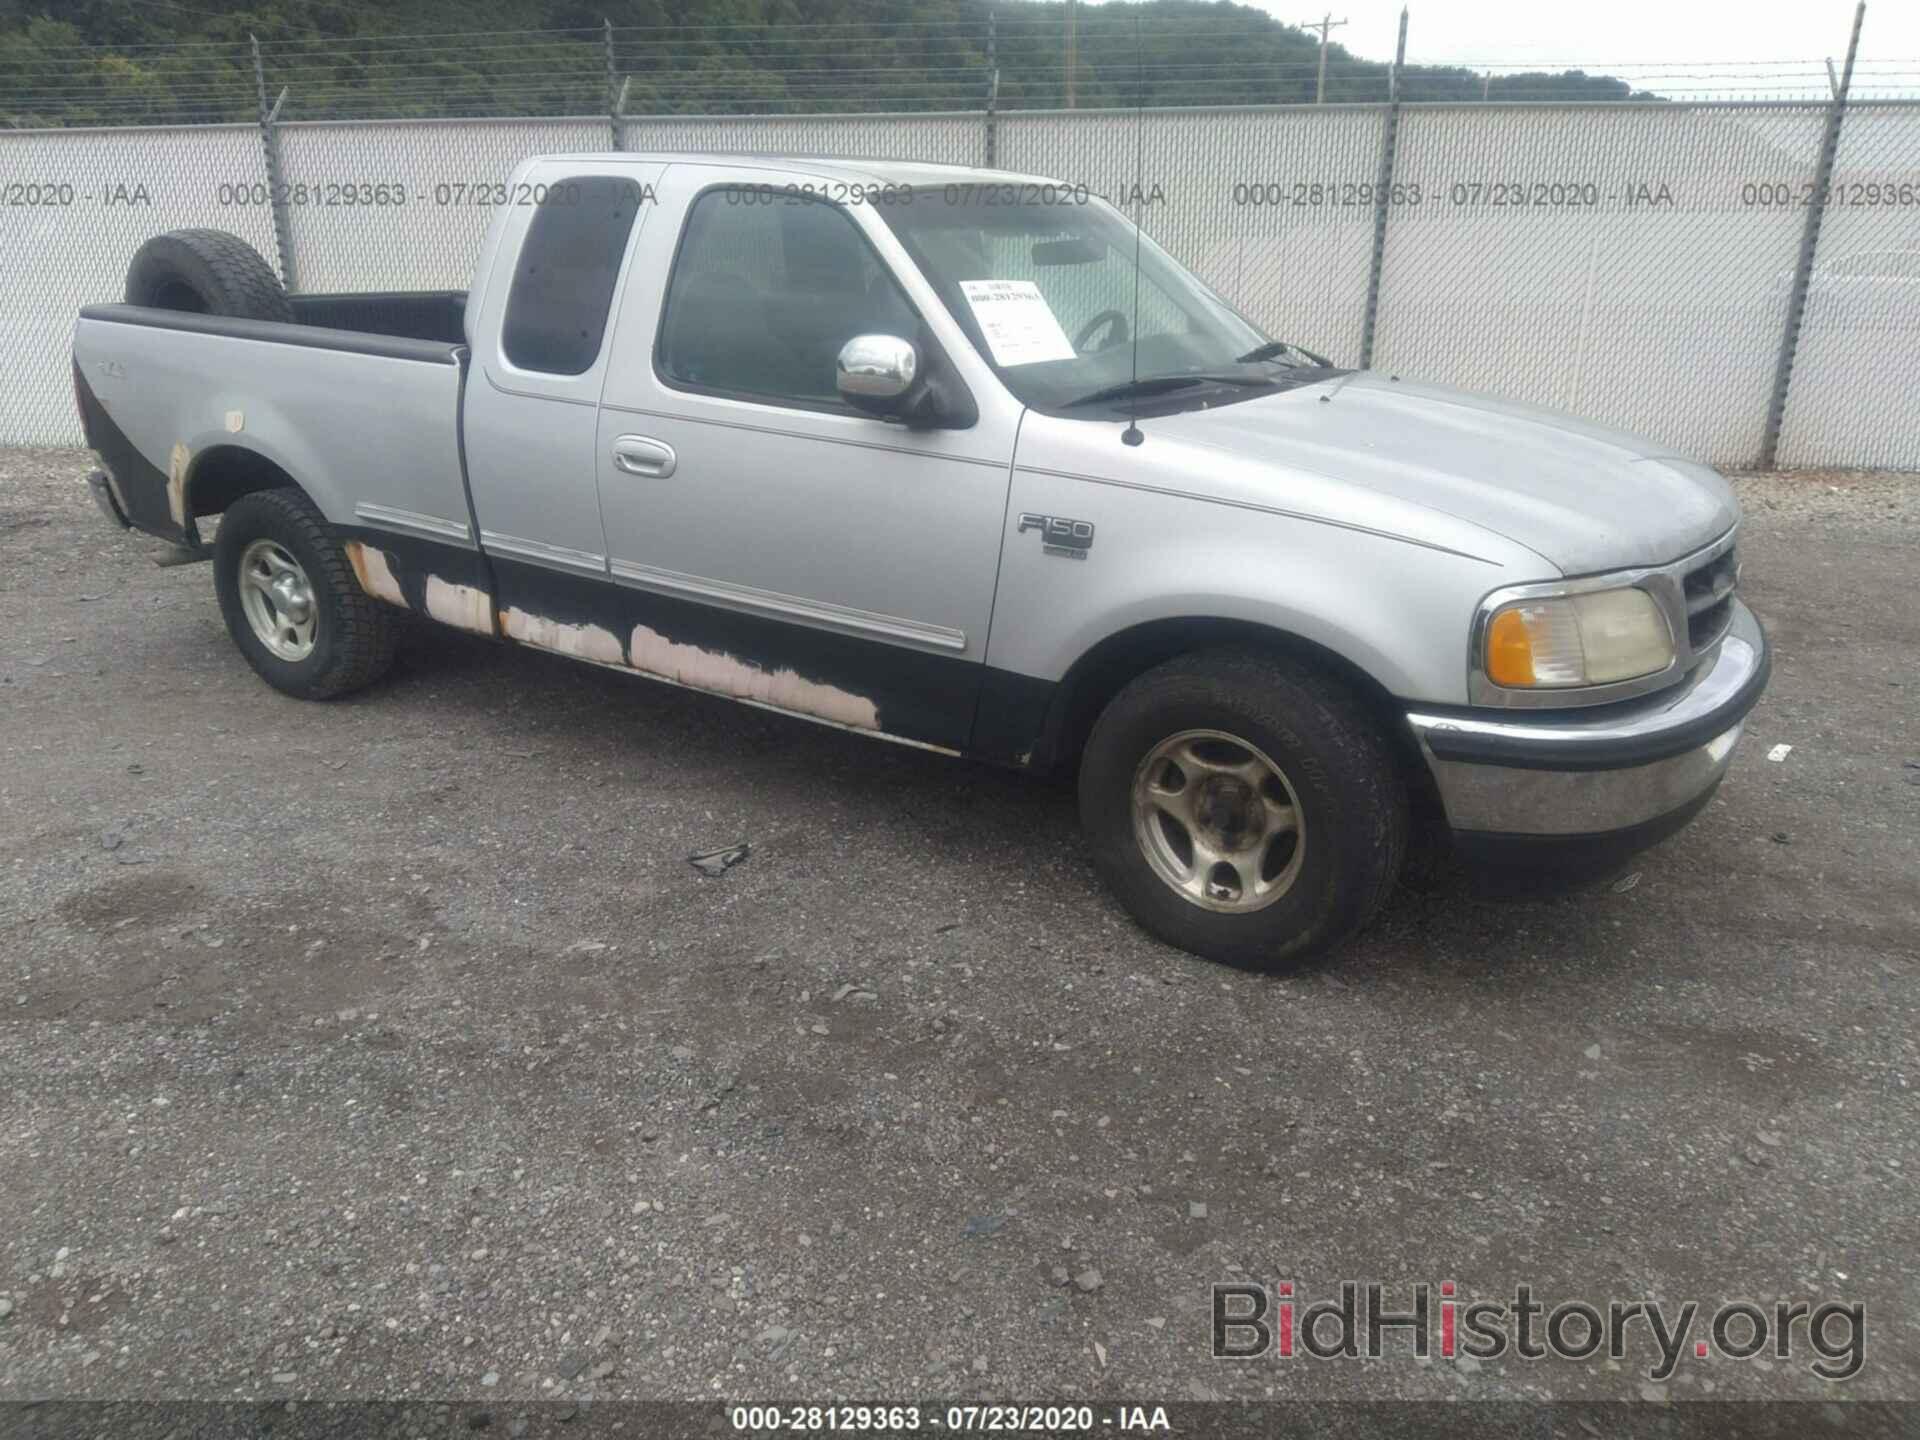 Photo 1FTZX1766WNA74585 - FORD F-150 1998